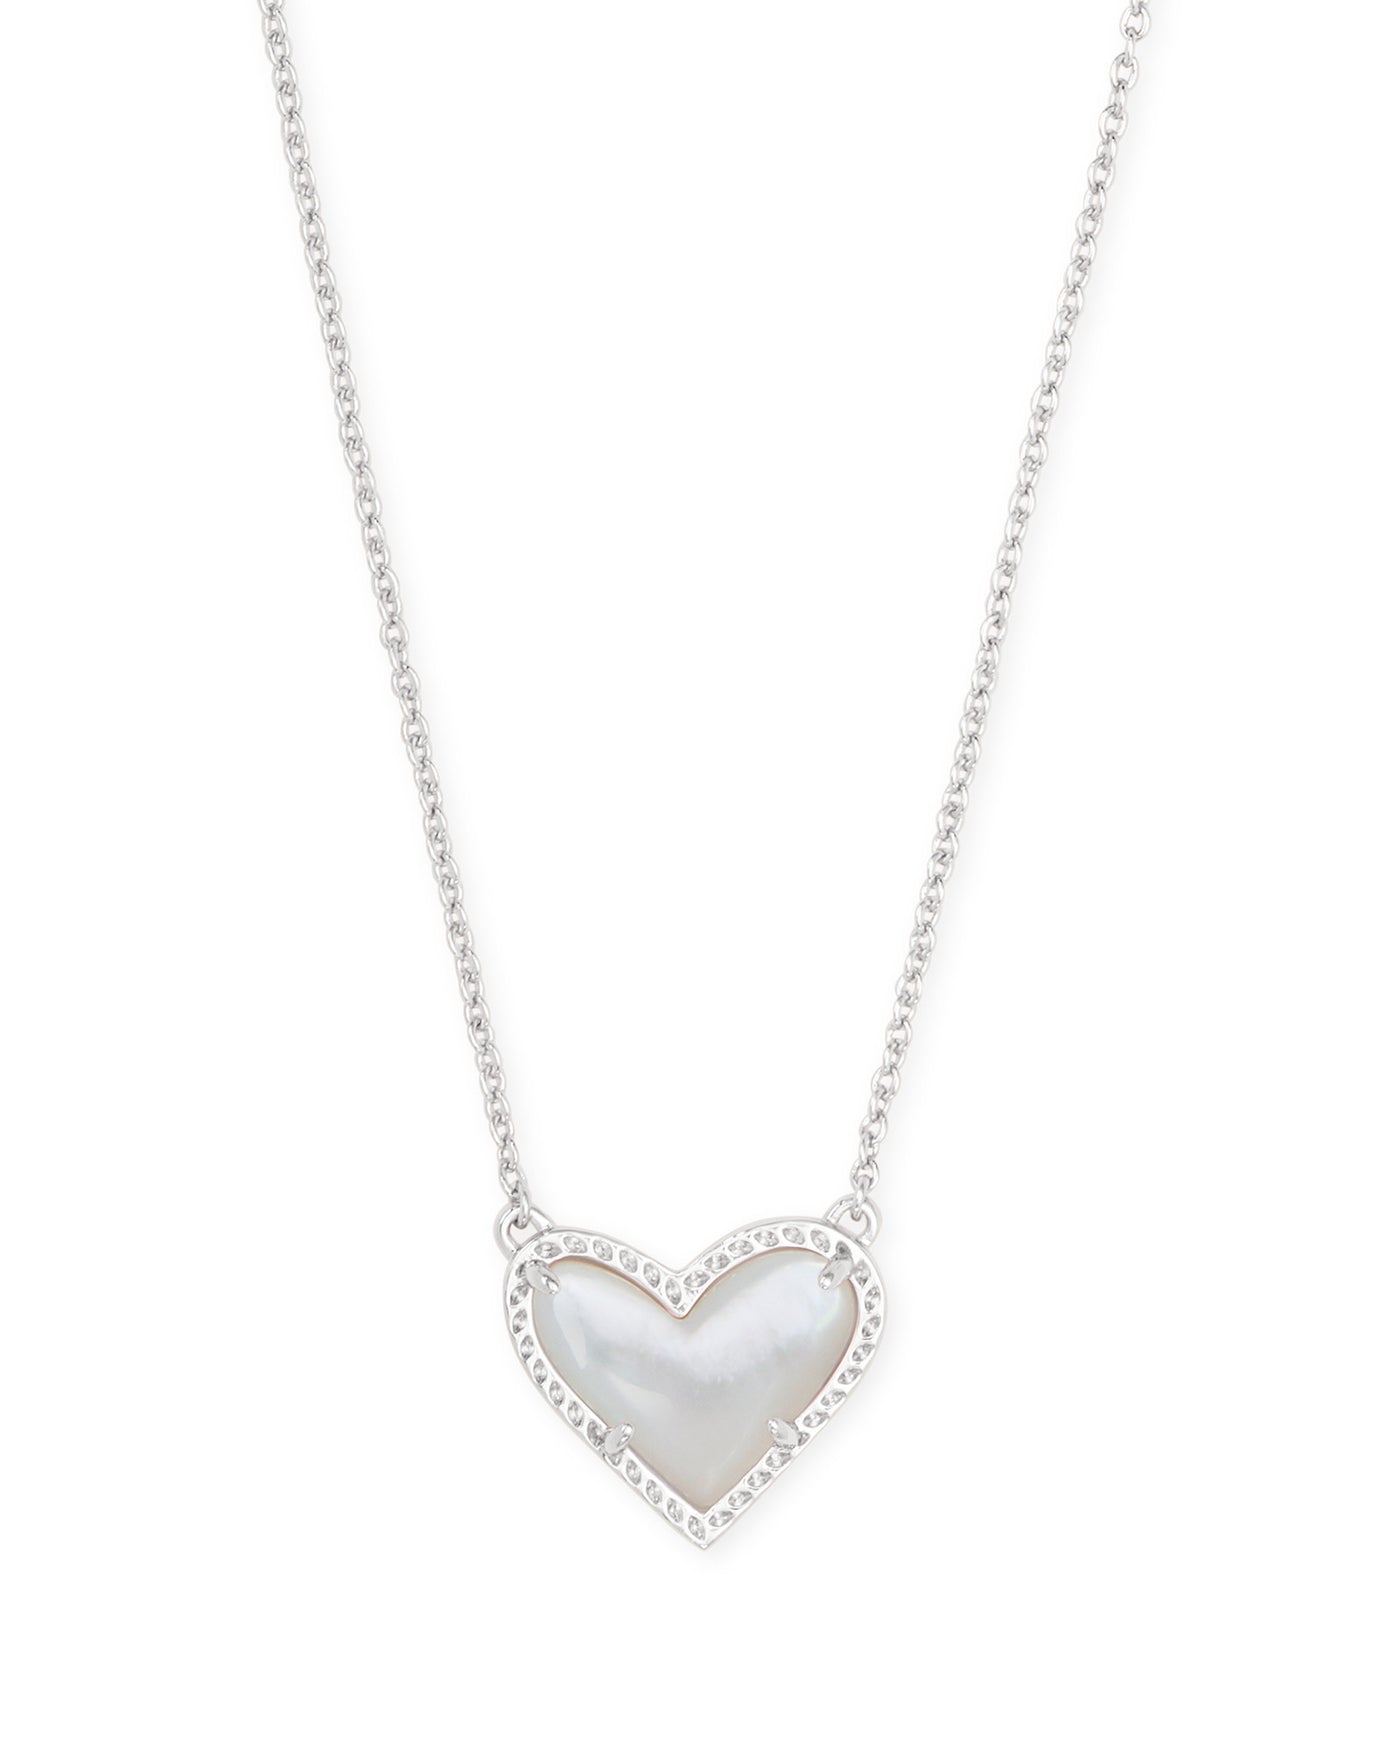 Ari Heart Pendant Necklace Silver Ivory Mother of Pearl on white background, front view.